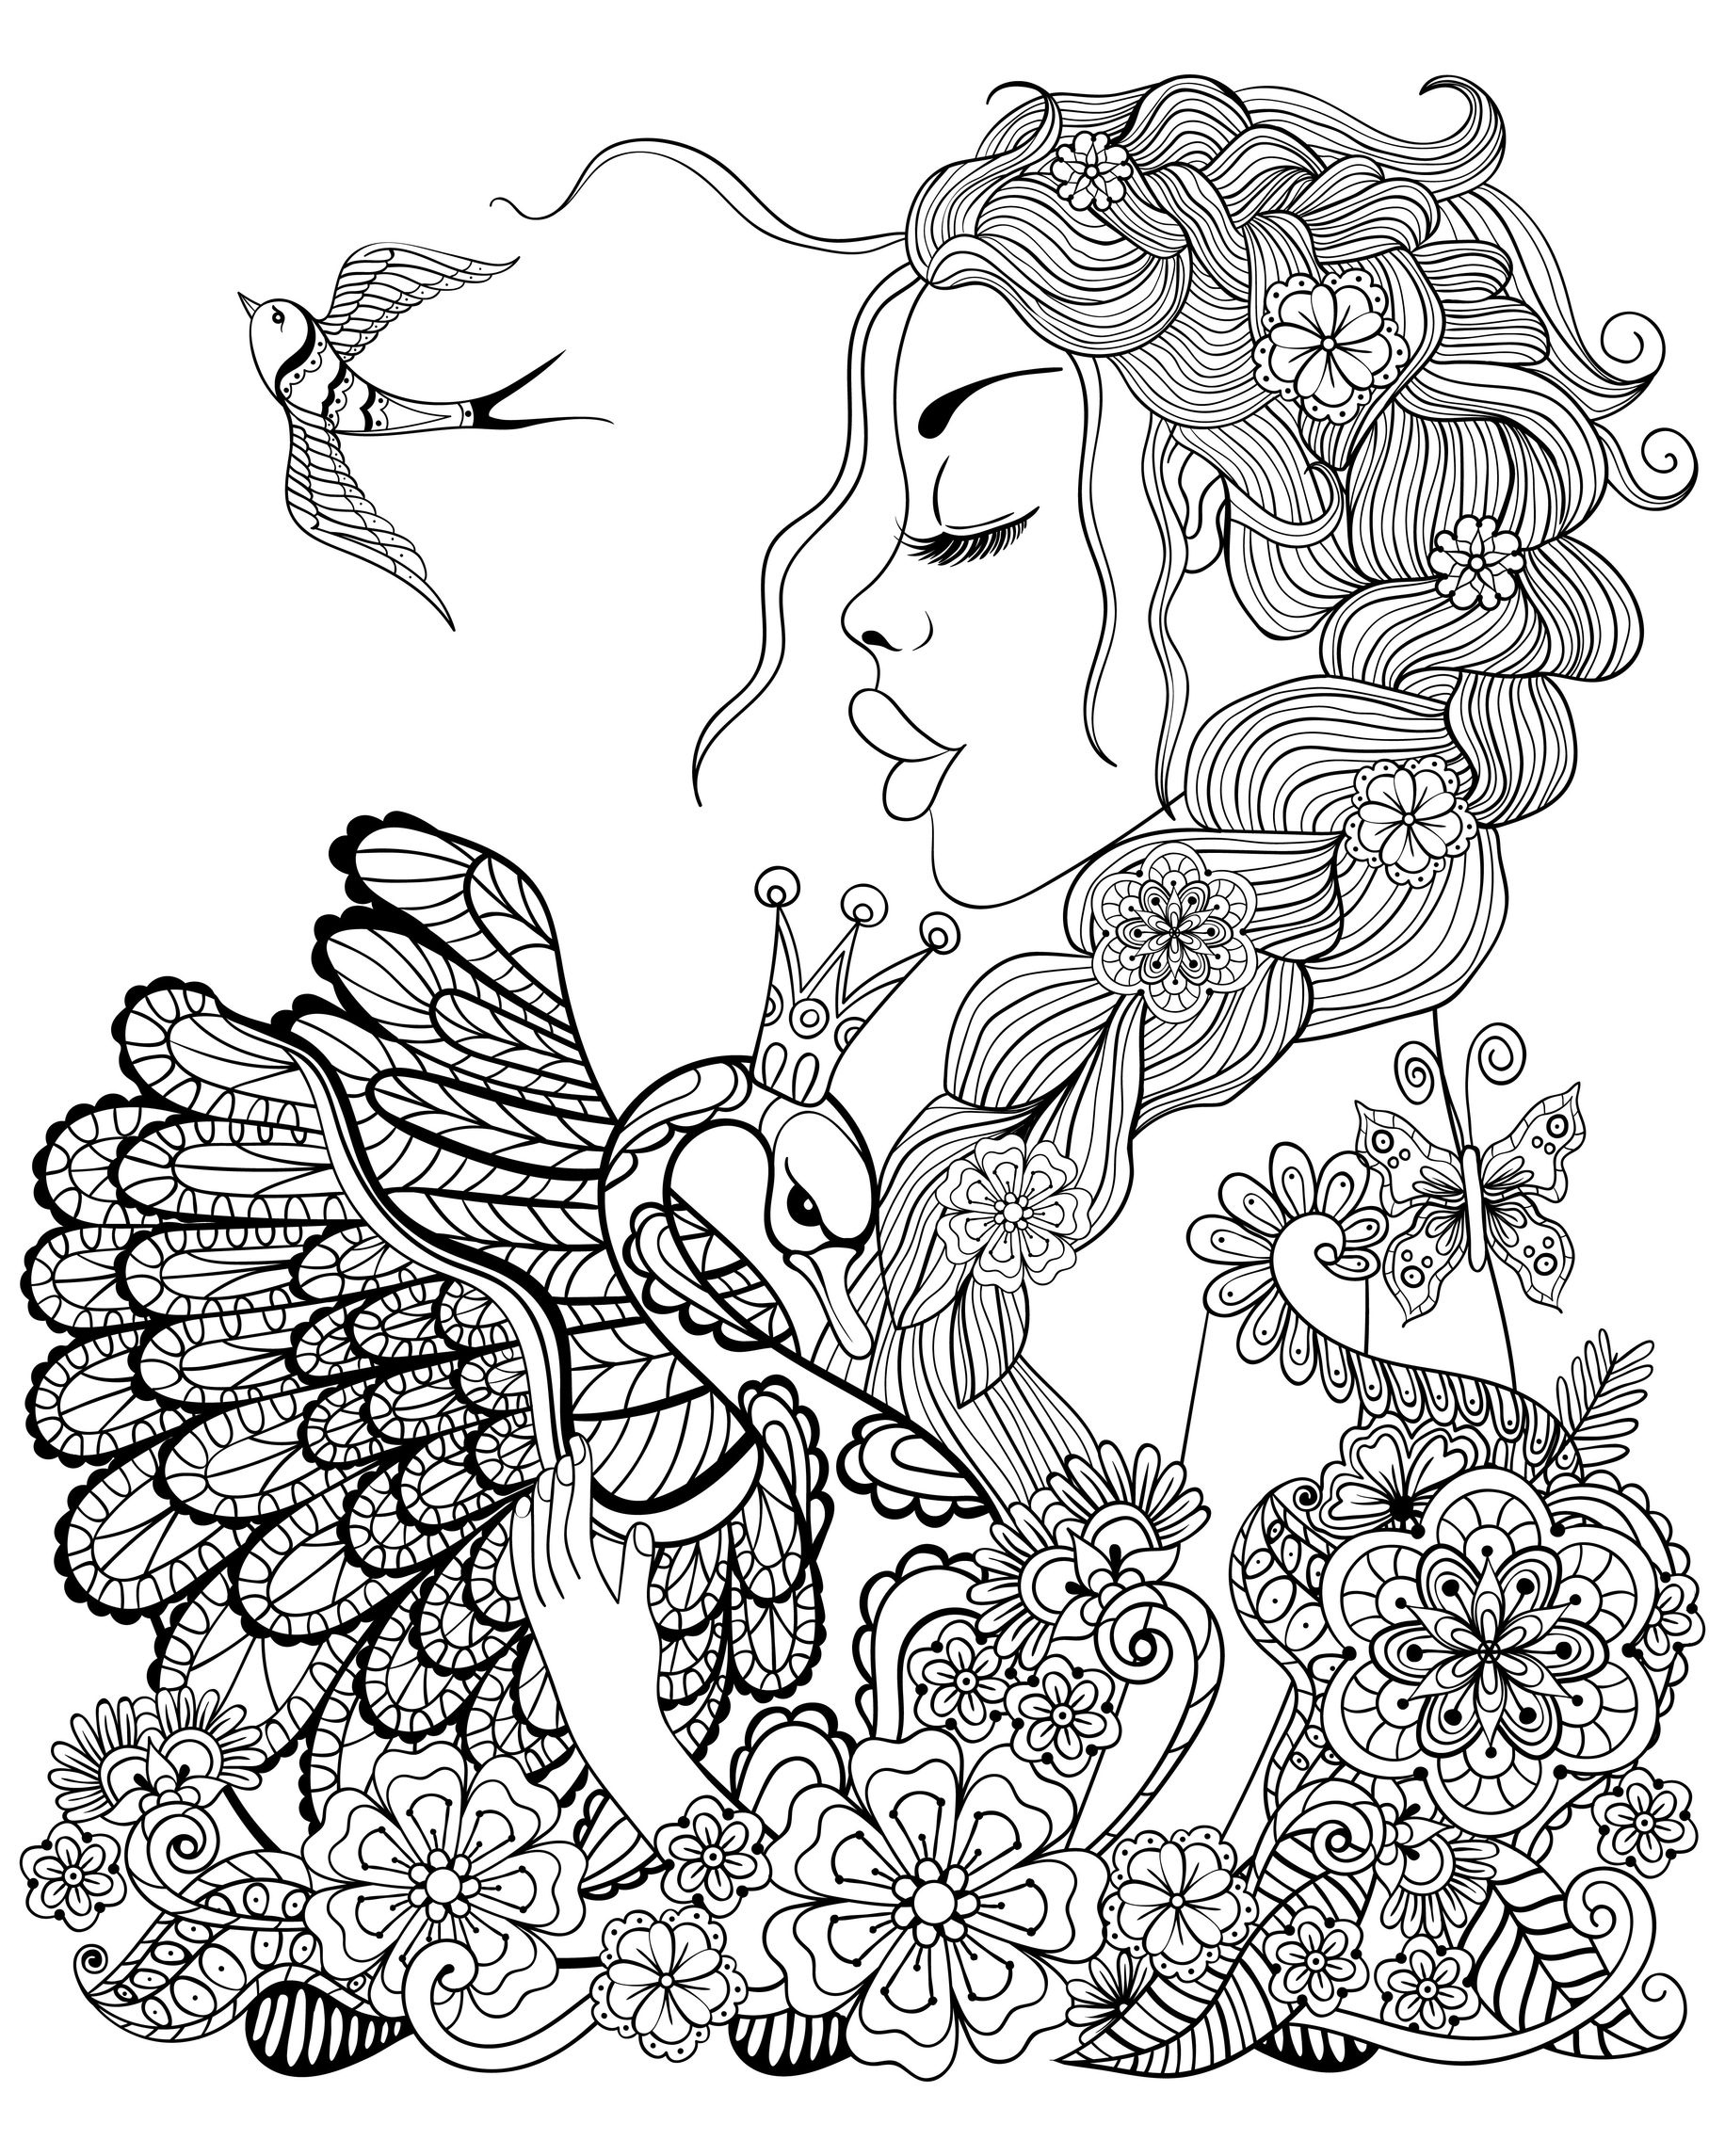 Fairy Coloring Pages For Adults Best Coloring Pages For Kids